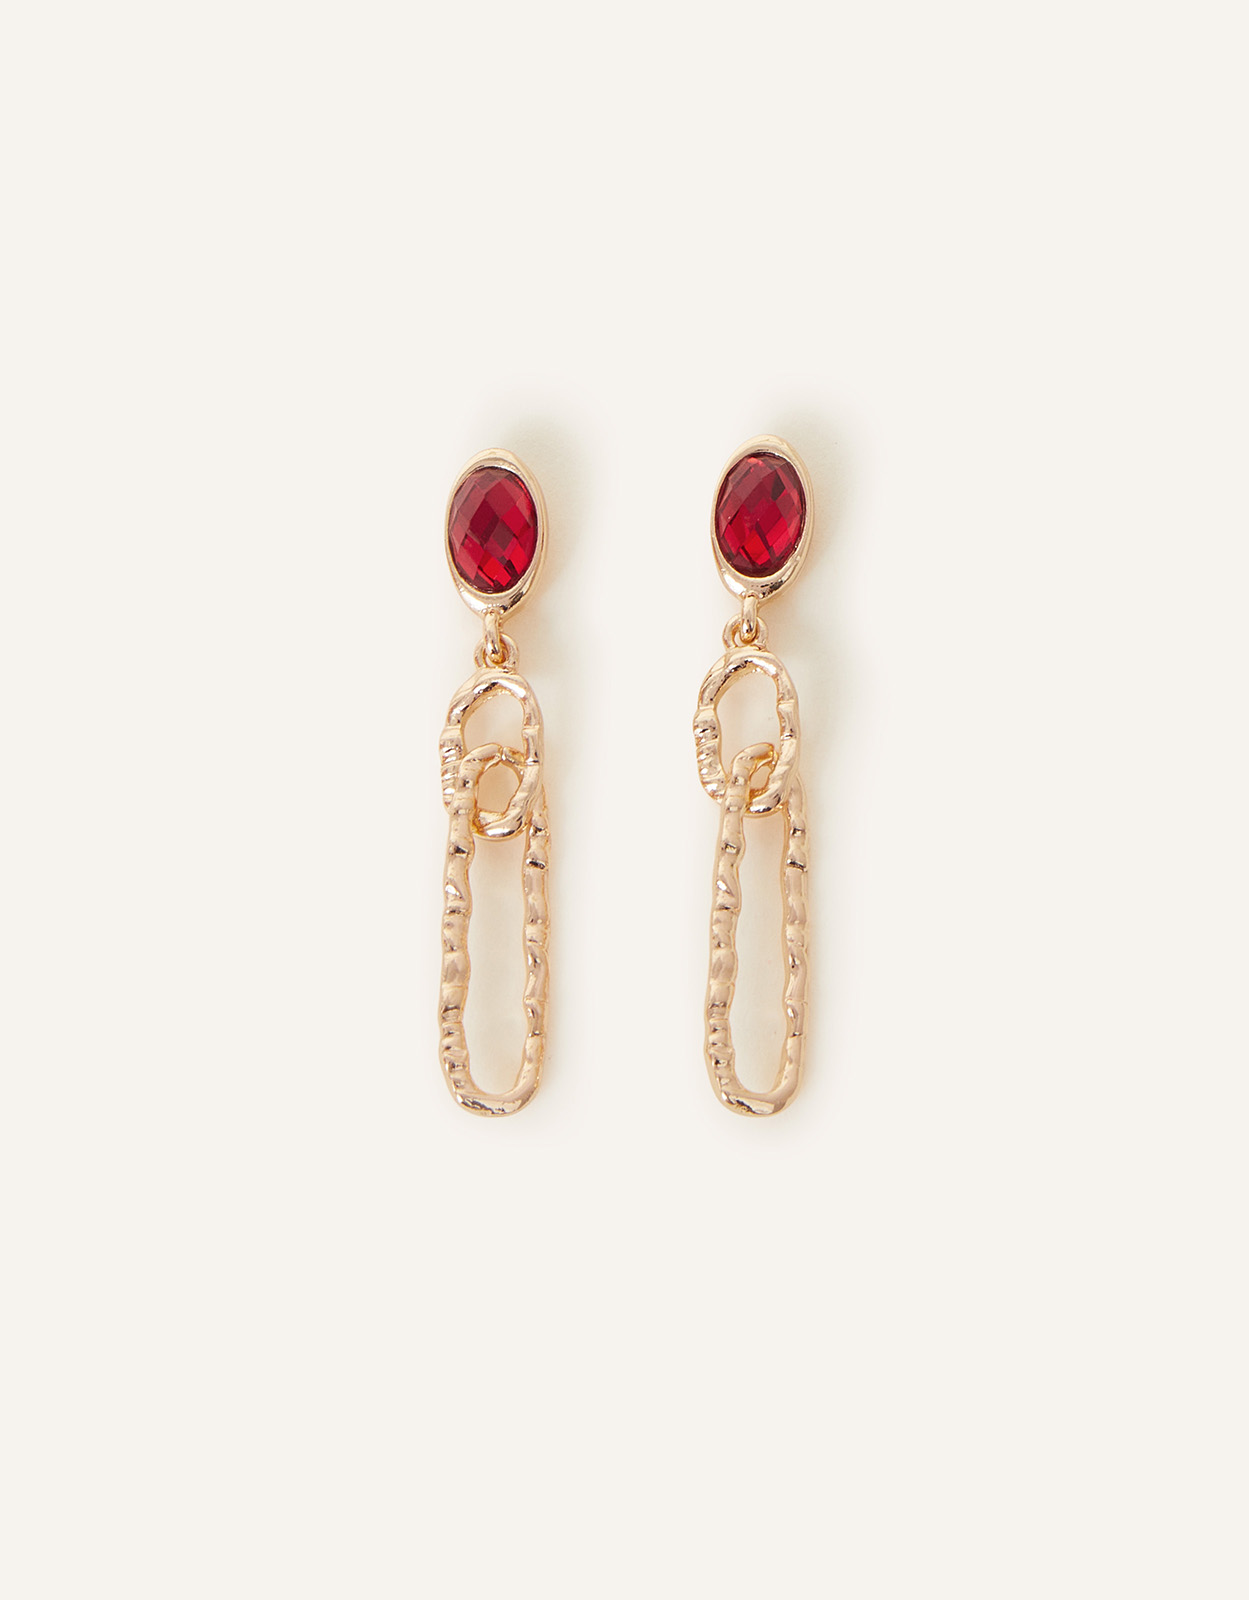 Accessorize Women's Gold and Red Gem Loop Drop Earrings, Size: 6cm